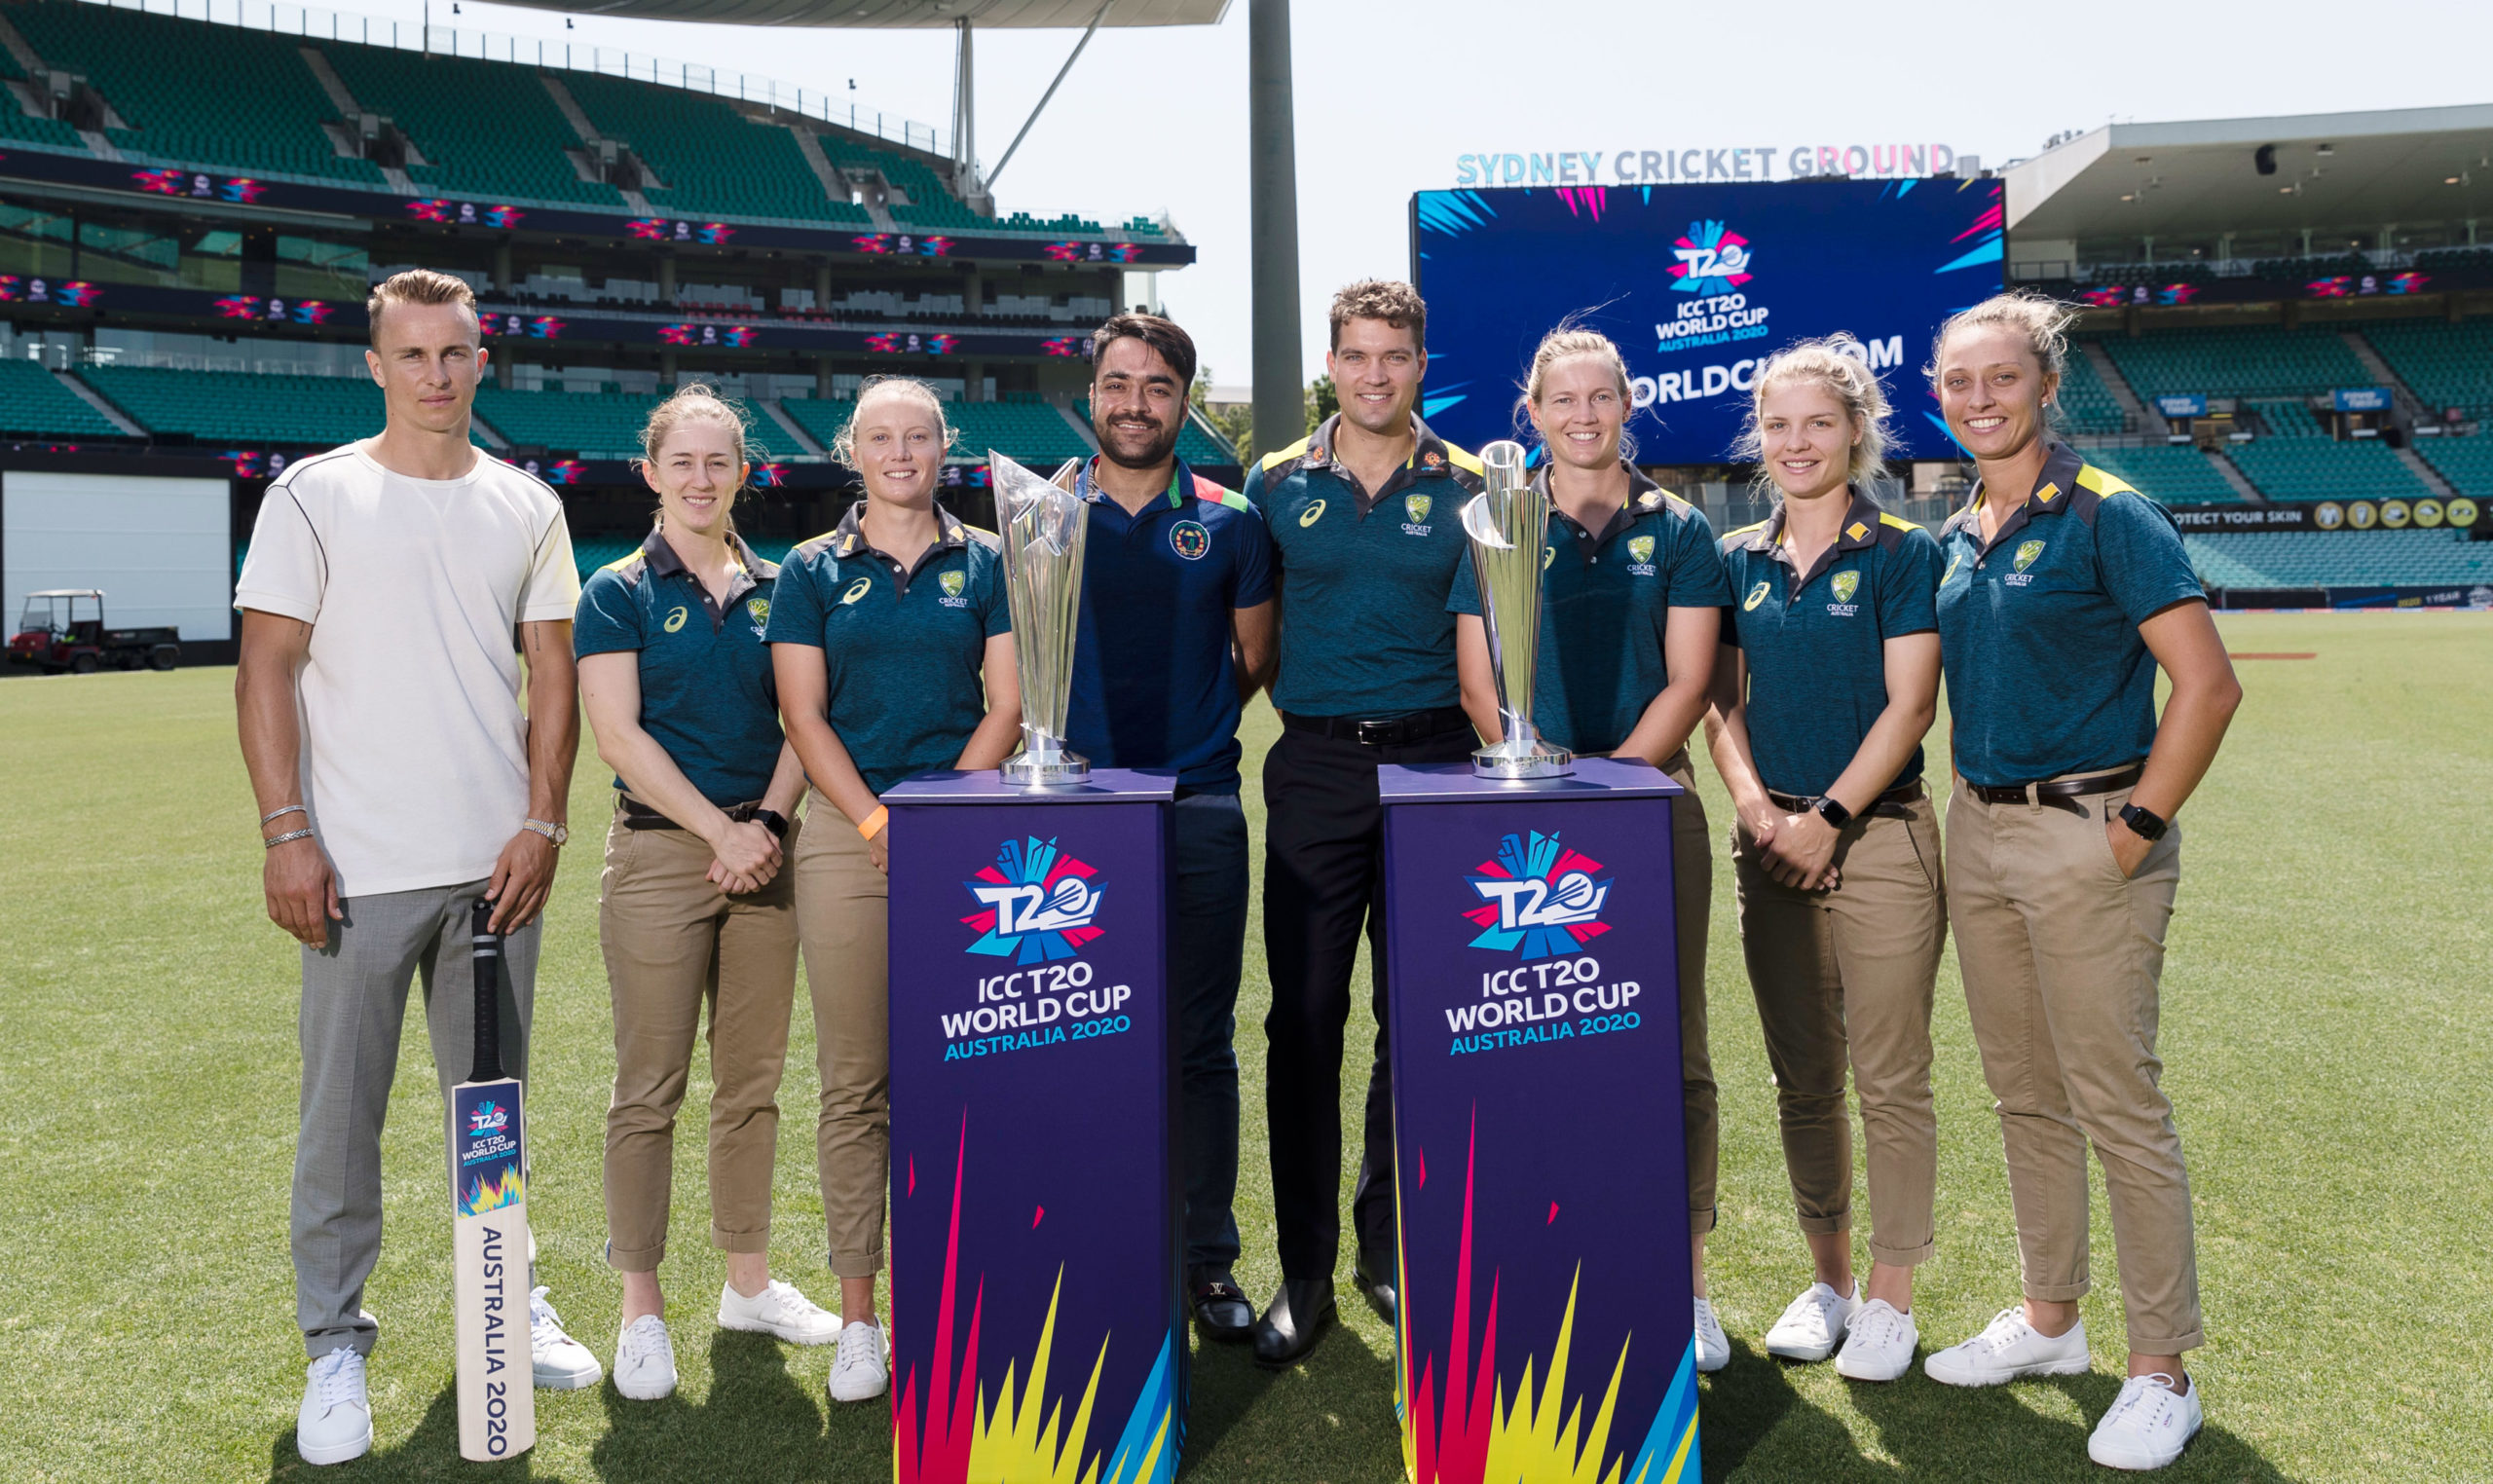 Women's T20 World Cup 2020 Fixtures and full schedule